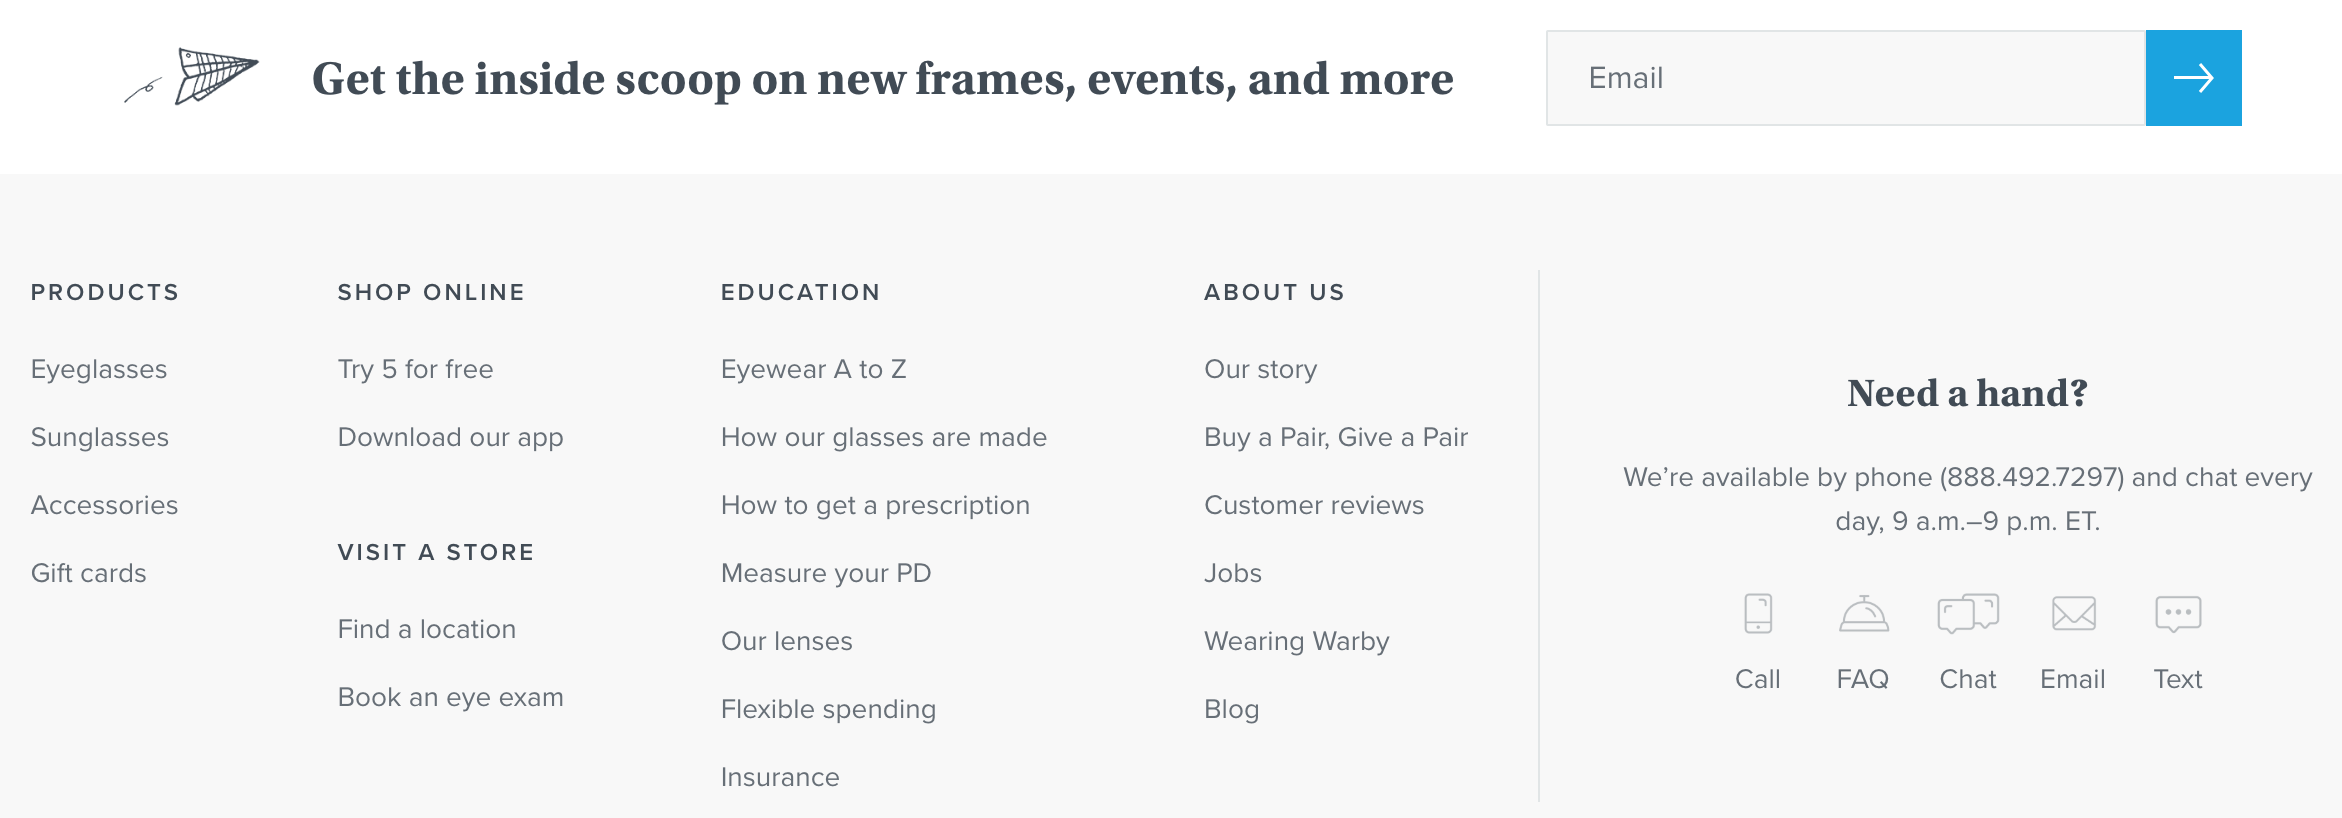 Footer from Warby Parker website